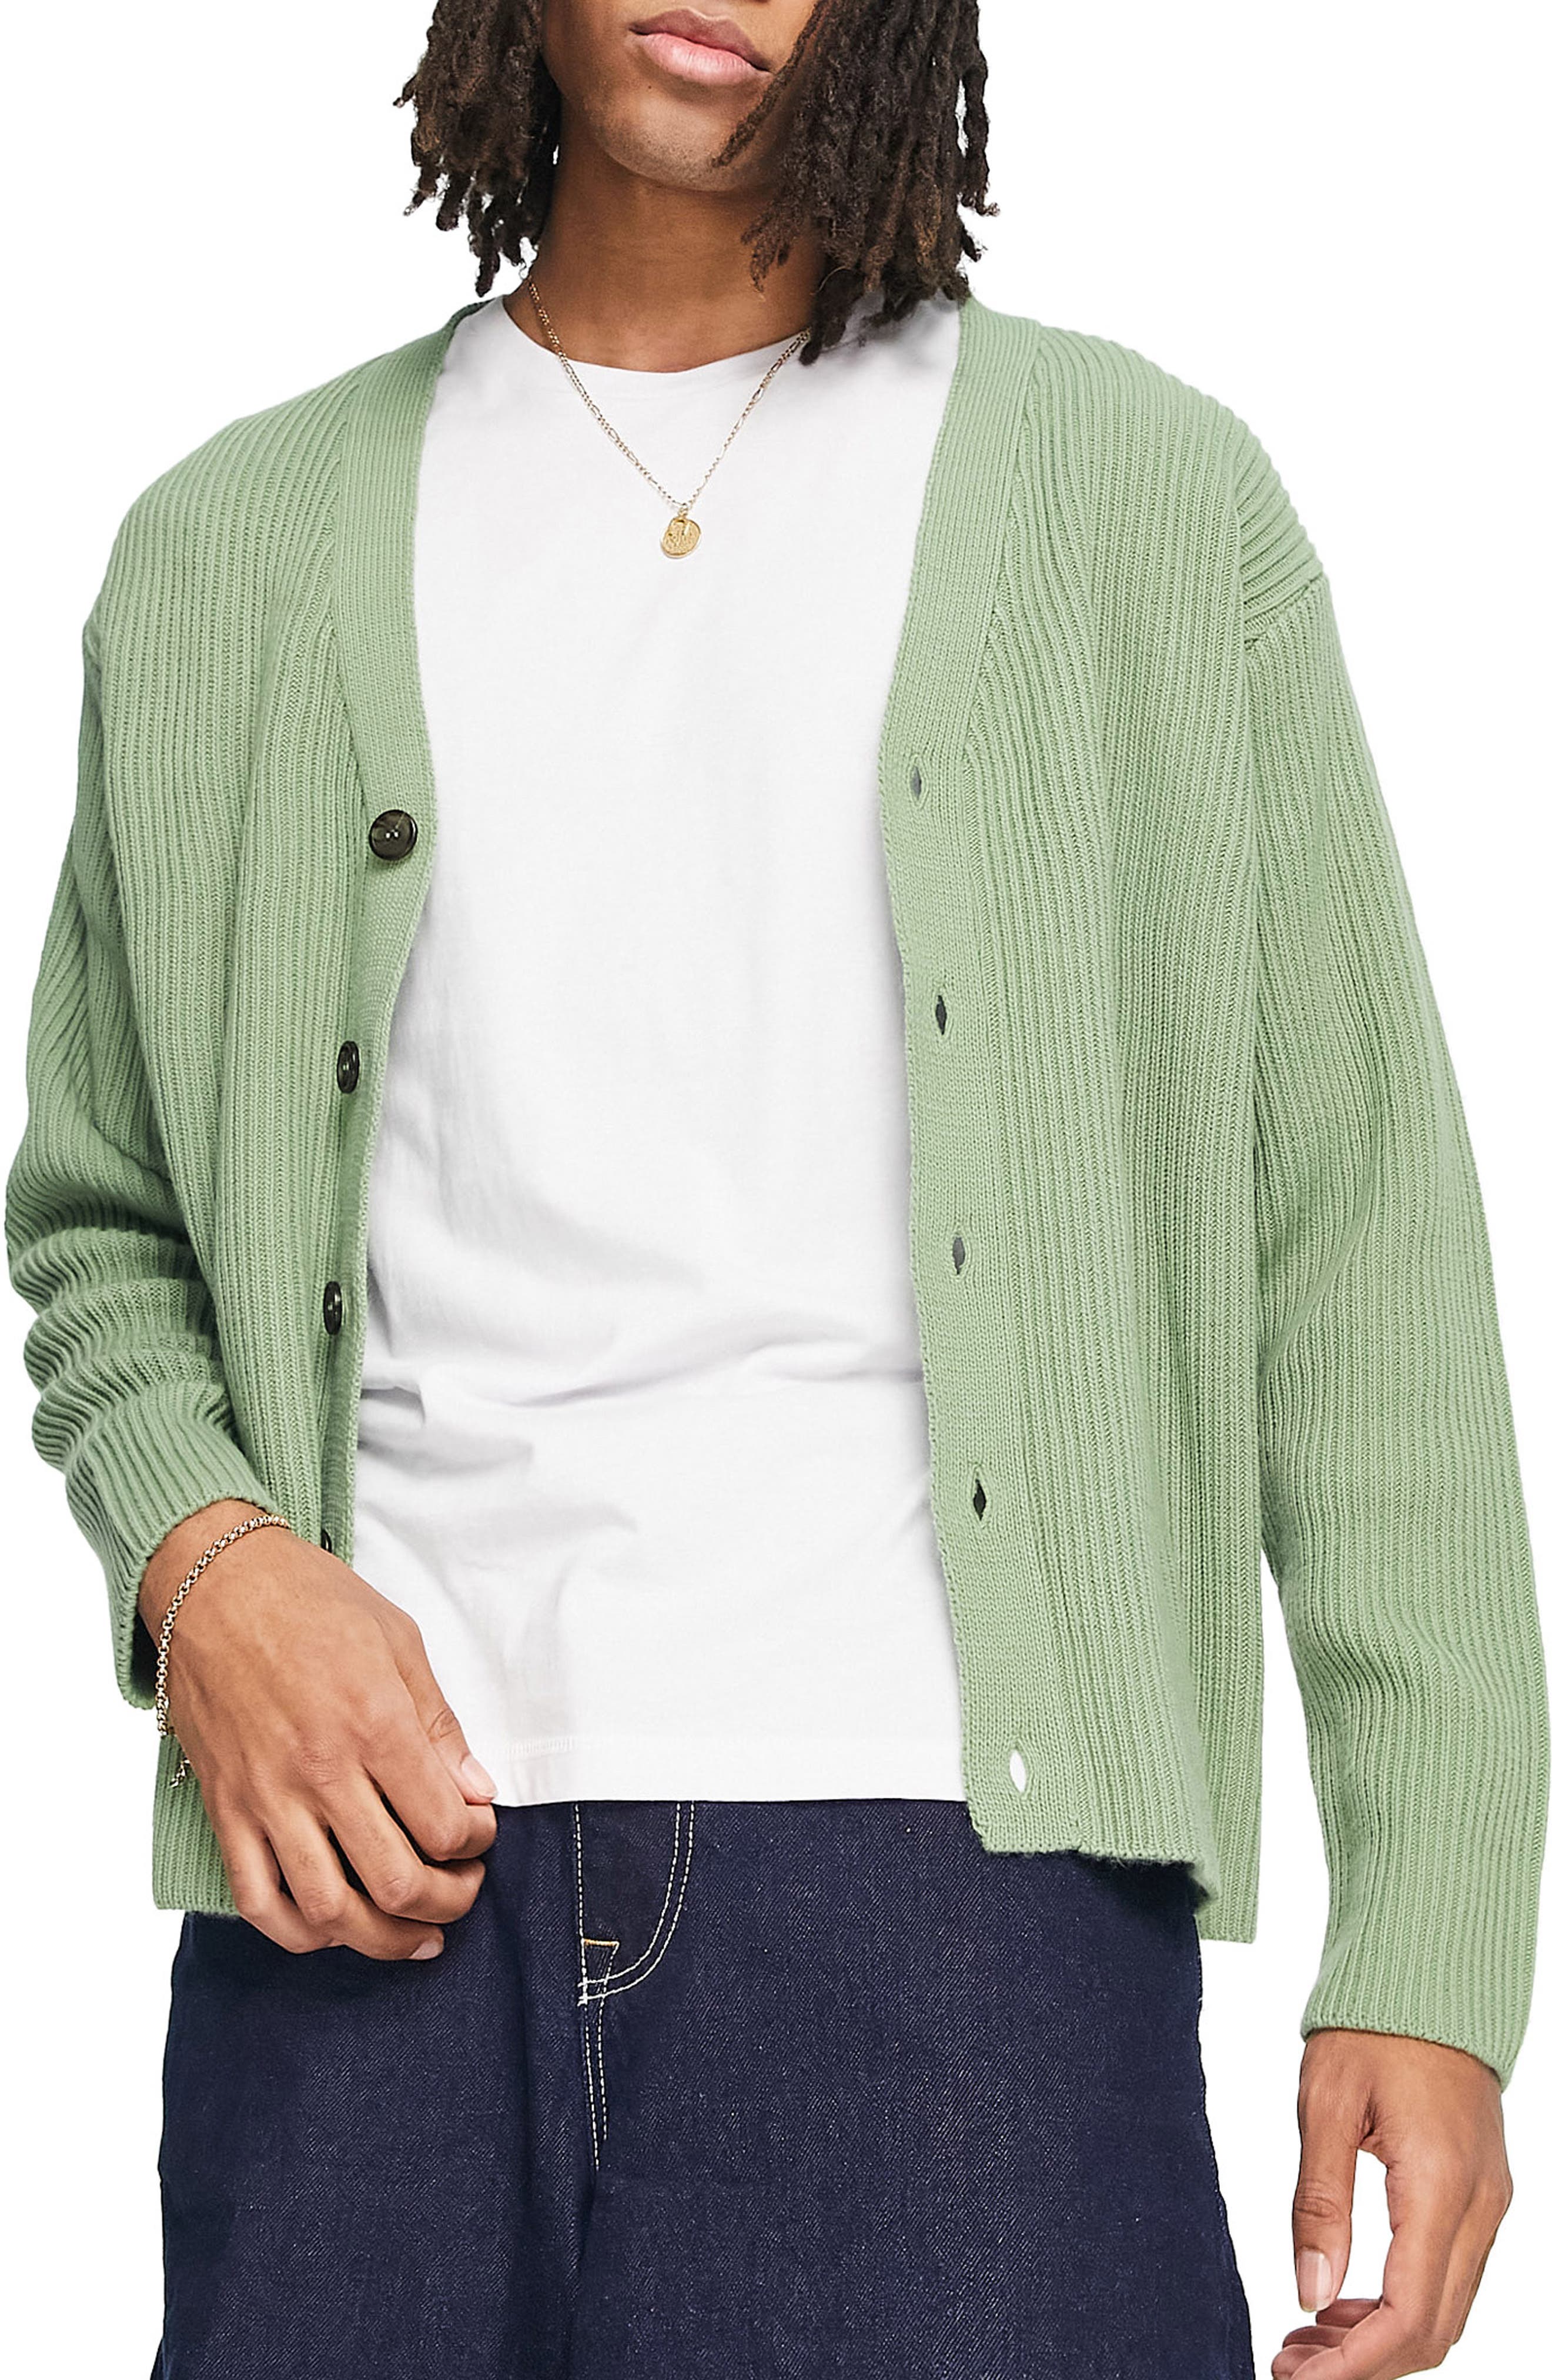 Mens Relax Fit Cardigan Sweater V-Neck Button Knitted Cardigan with Pockets